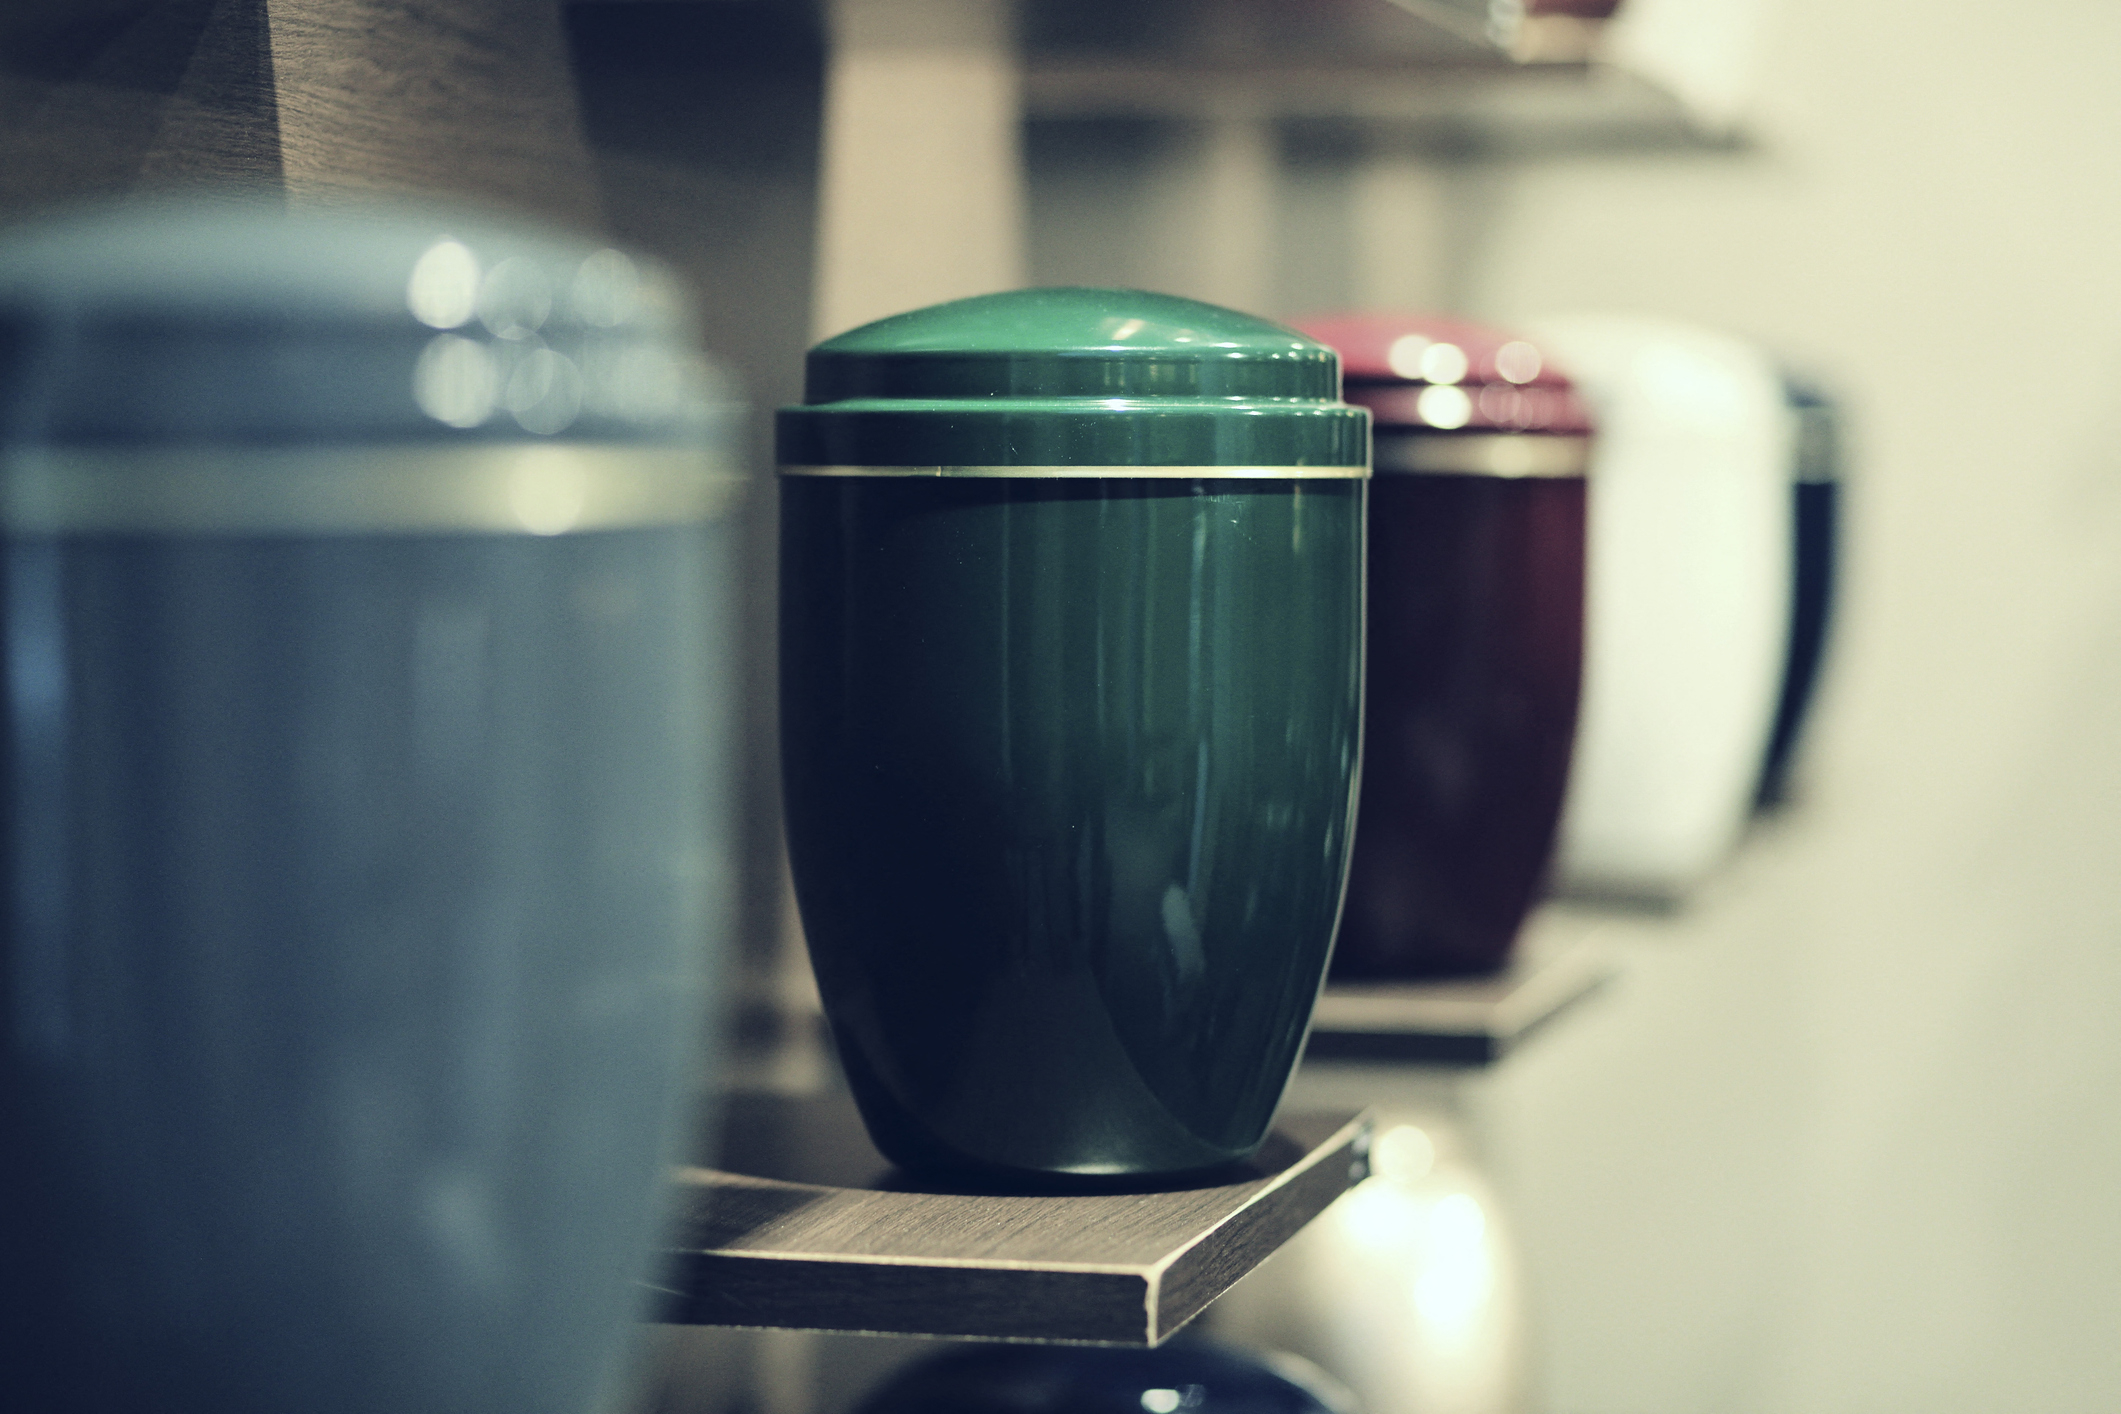 A row of urns on shelves, each with a simple, elegant design, in various shapes and sizes